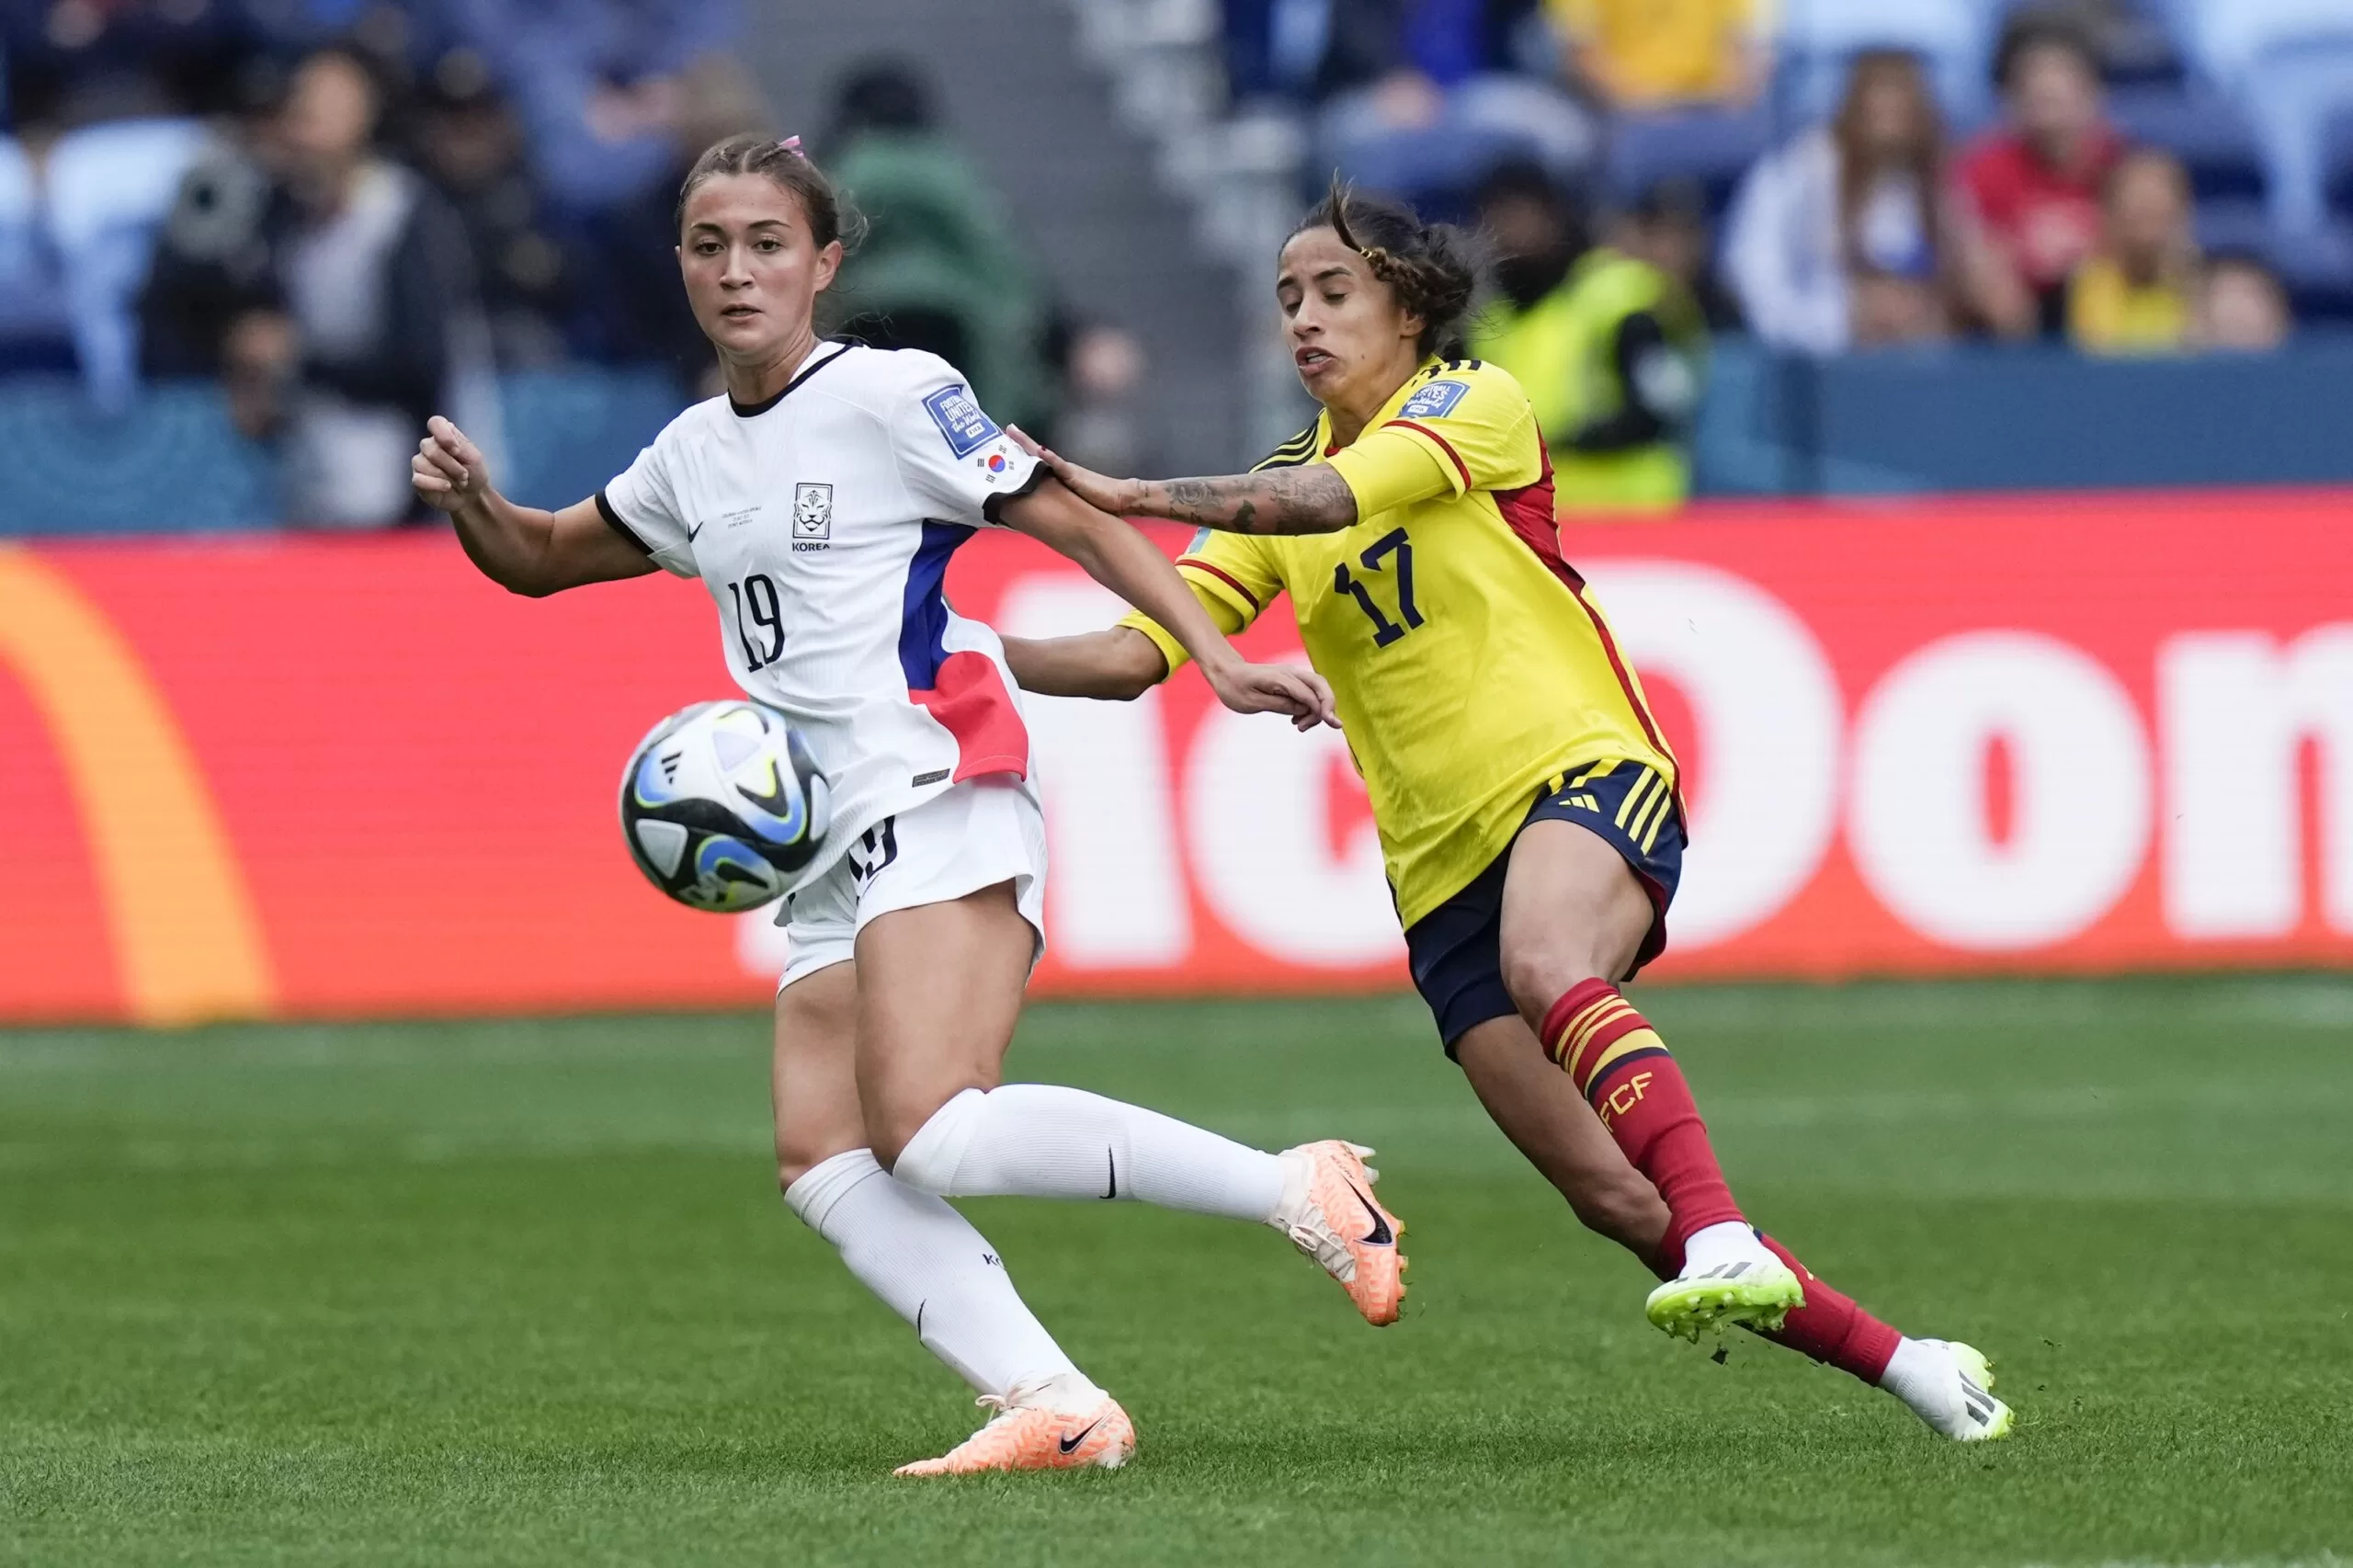 South Korea looks to 16-year-old Casey Phair to lead rebuild after Women’s World Cup elimination
